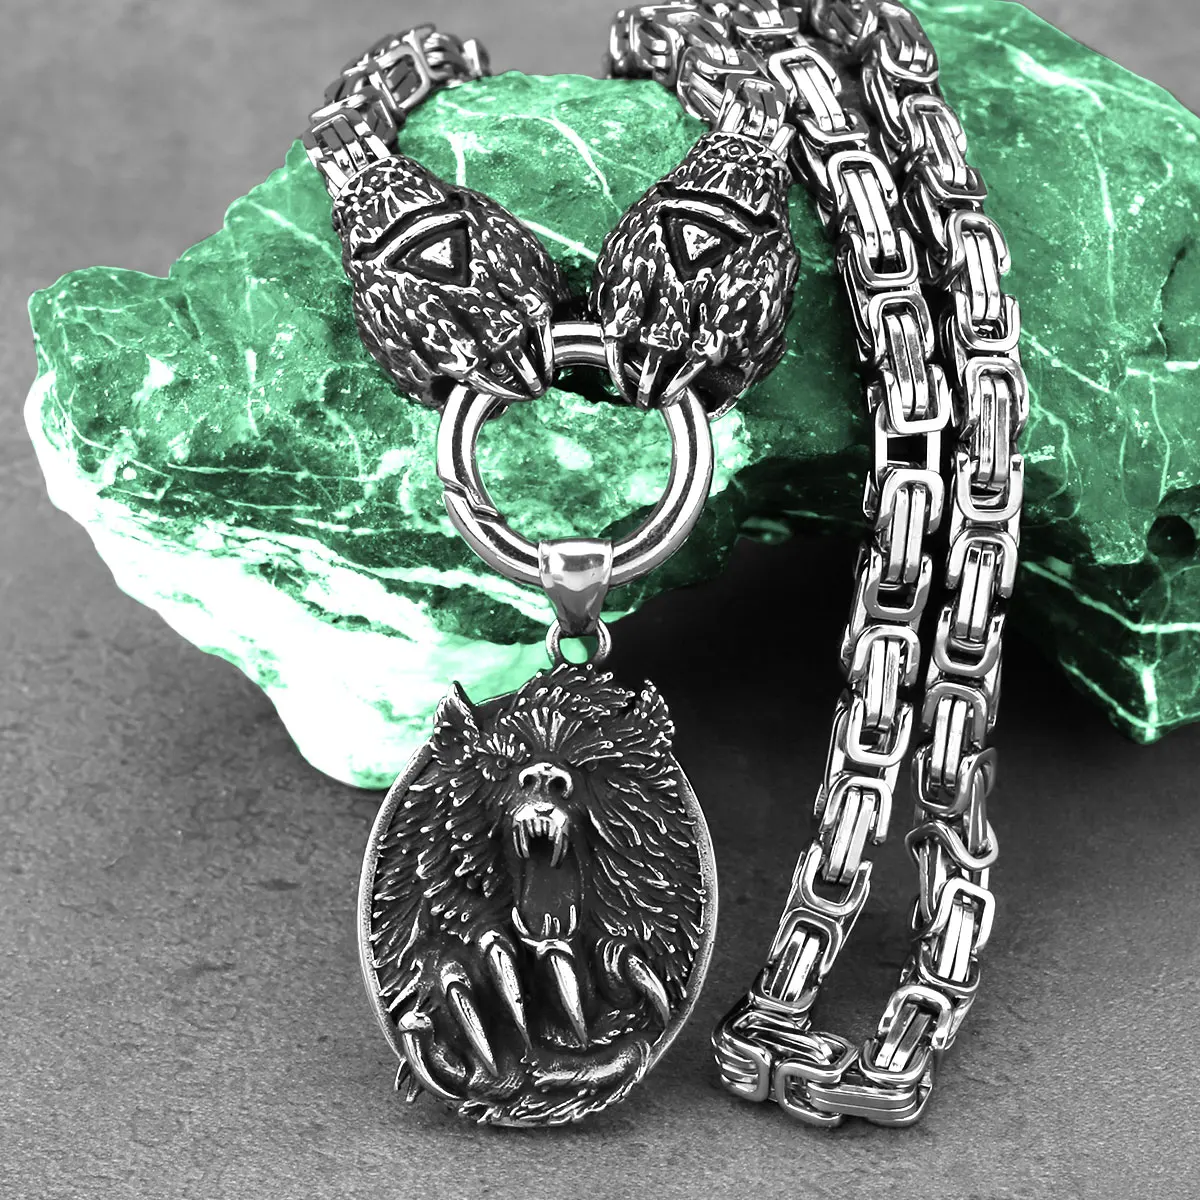 

Vintage Viking Wolf Head Pendant Rune Bear Claw Thor Set Necklace Men's Stainless Steel Hip Hop Fashion Vikings Jewelry Gift